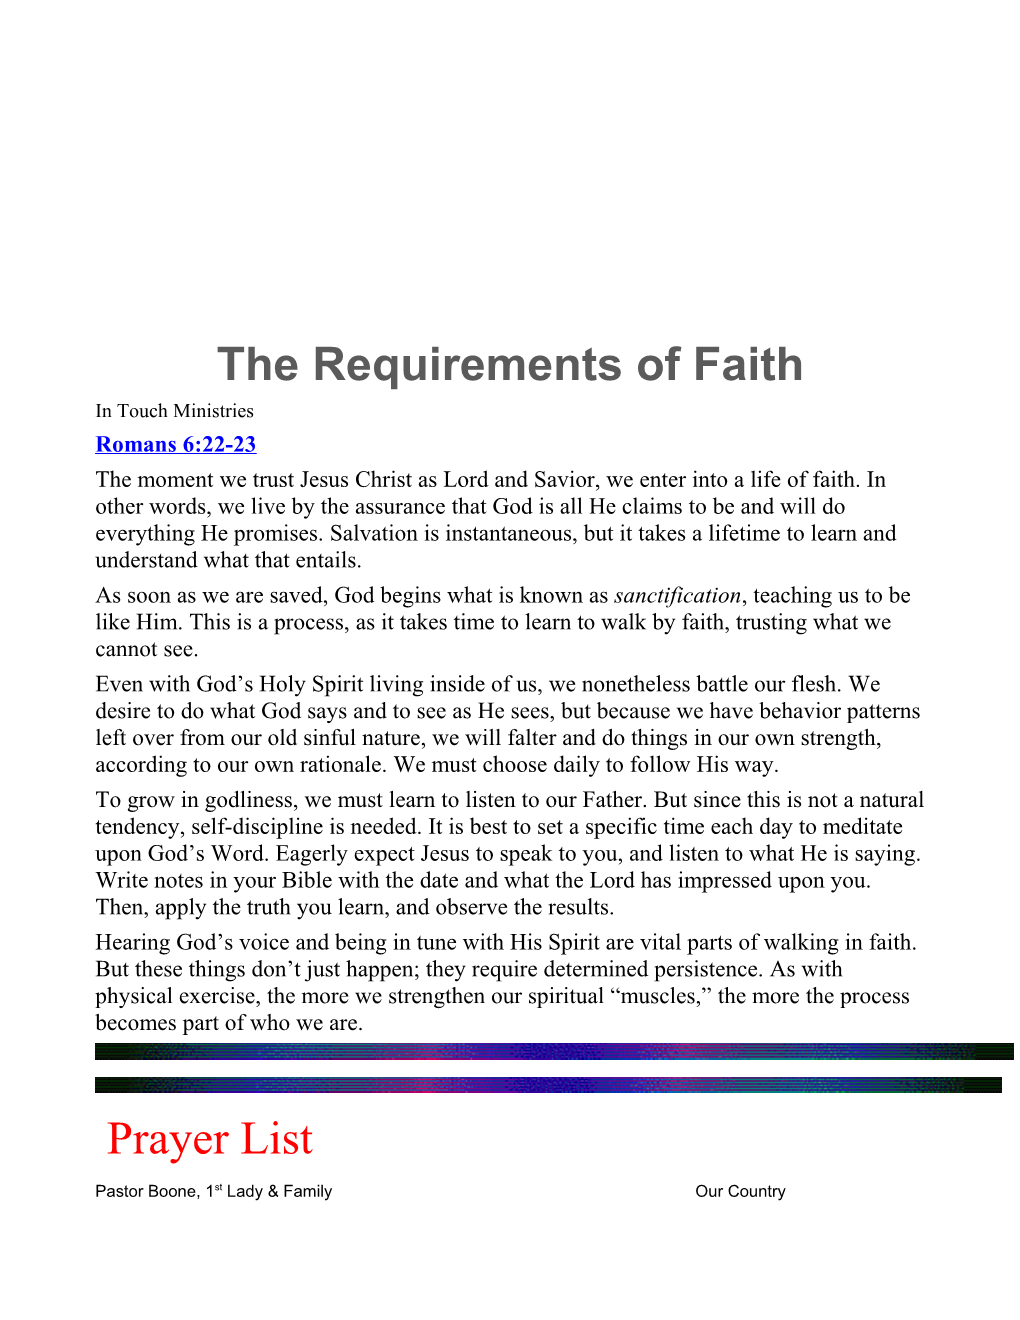 The Requirements of Faith